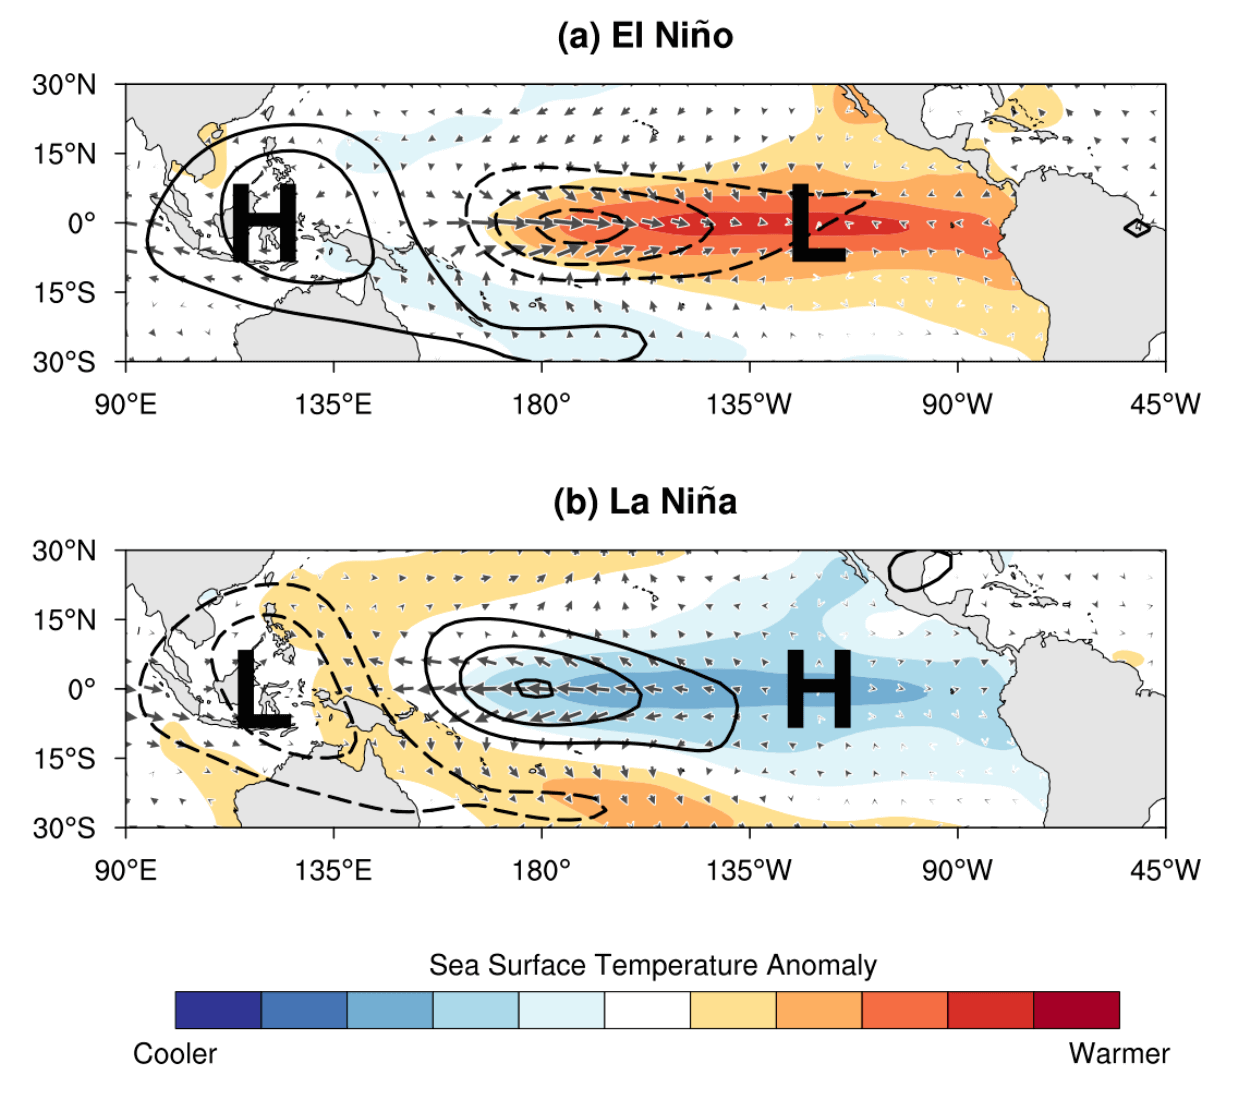 enso-el-nino-watch-forecast-2023-weather-temperature-pressure-anomaly-cold-atmospheric-pattern-forecast